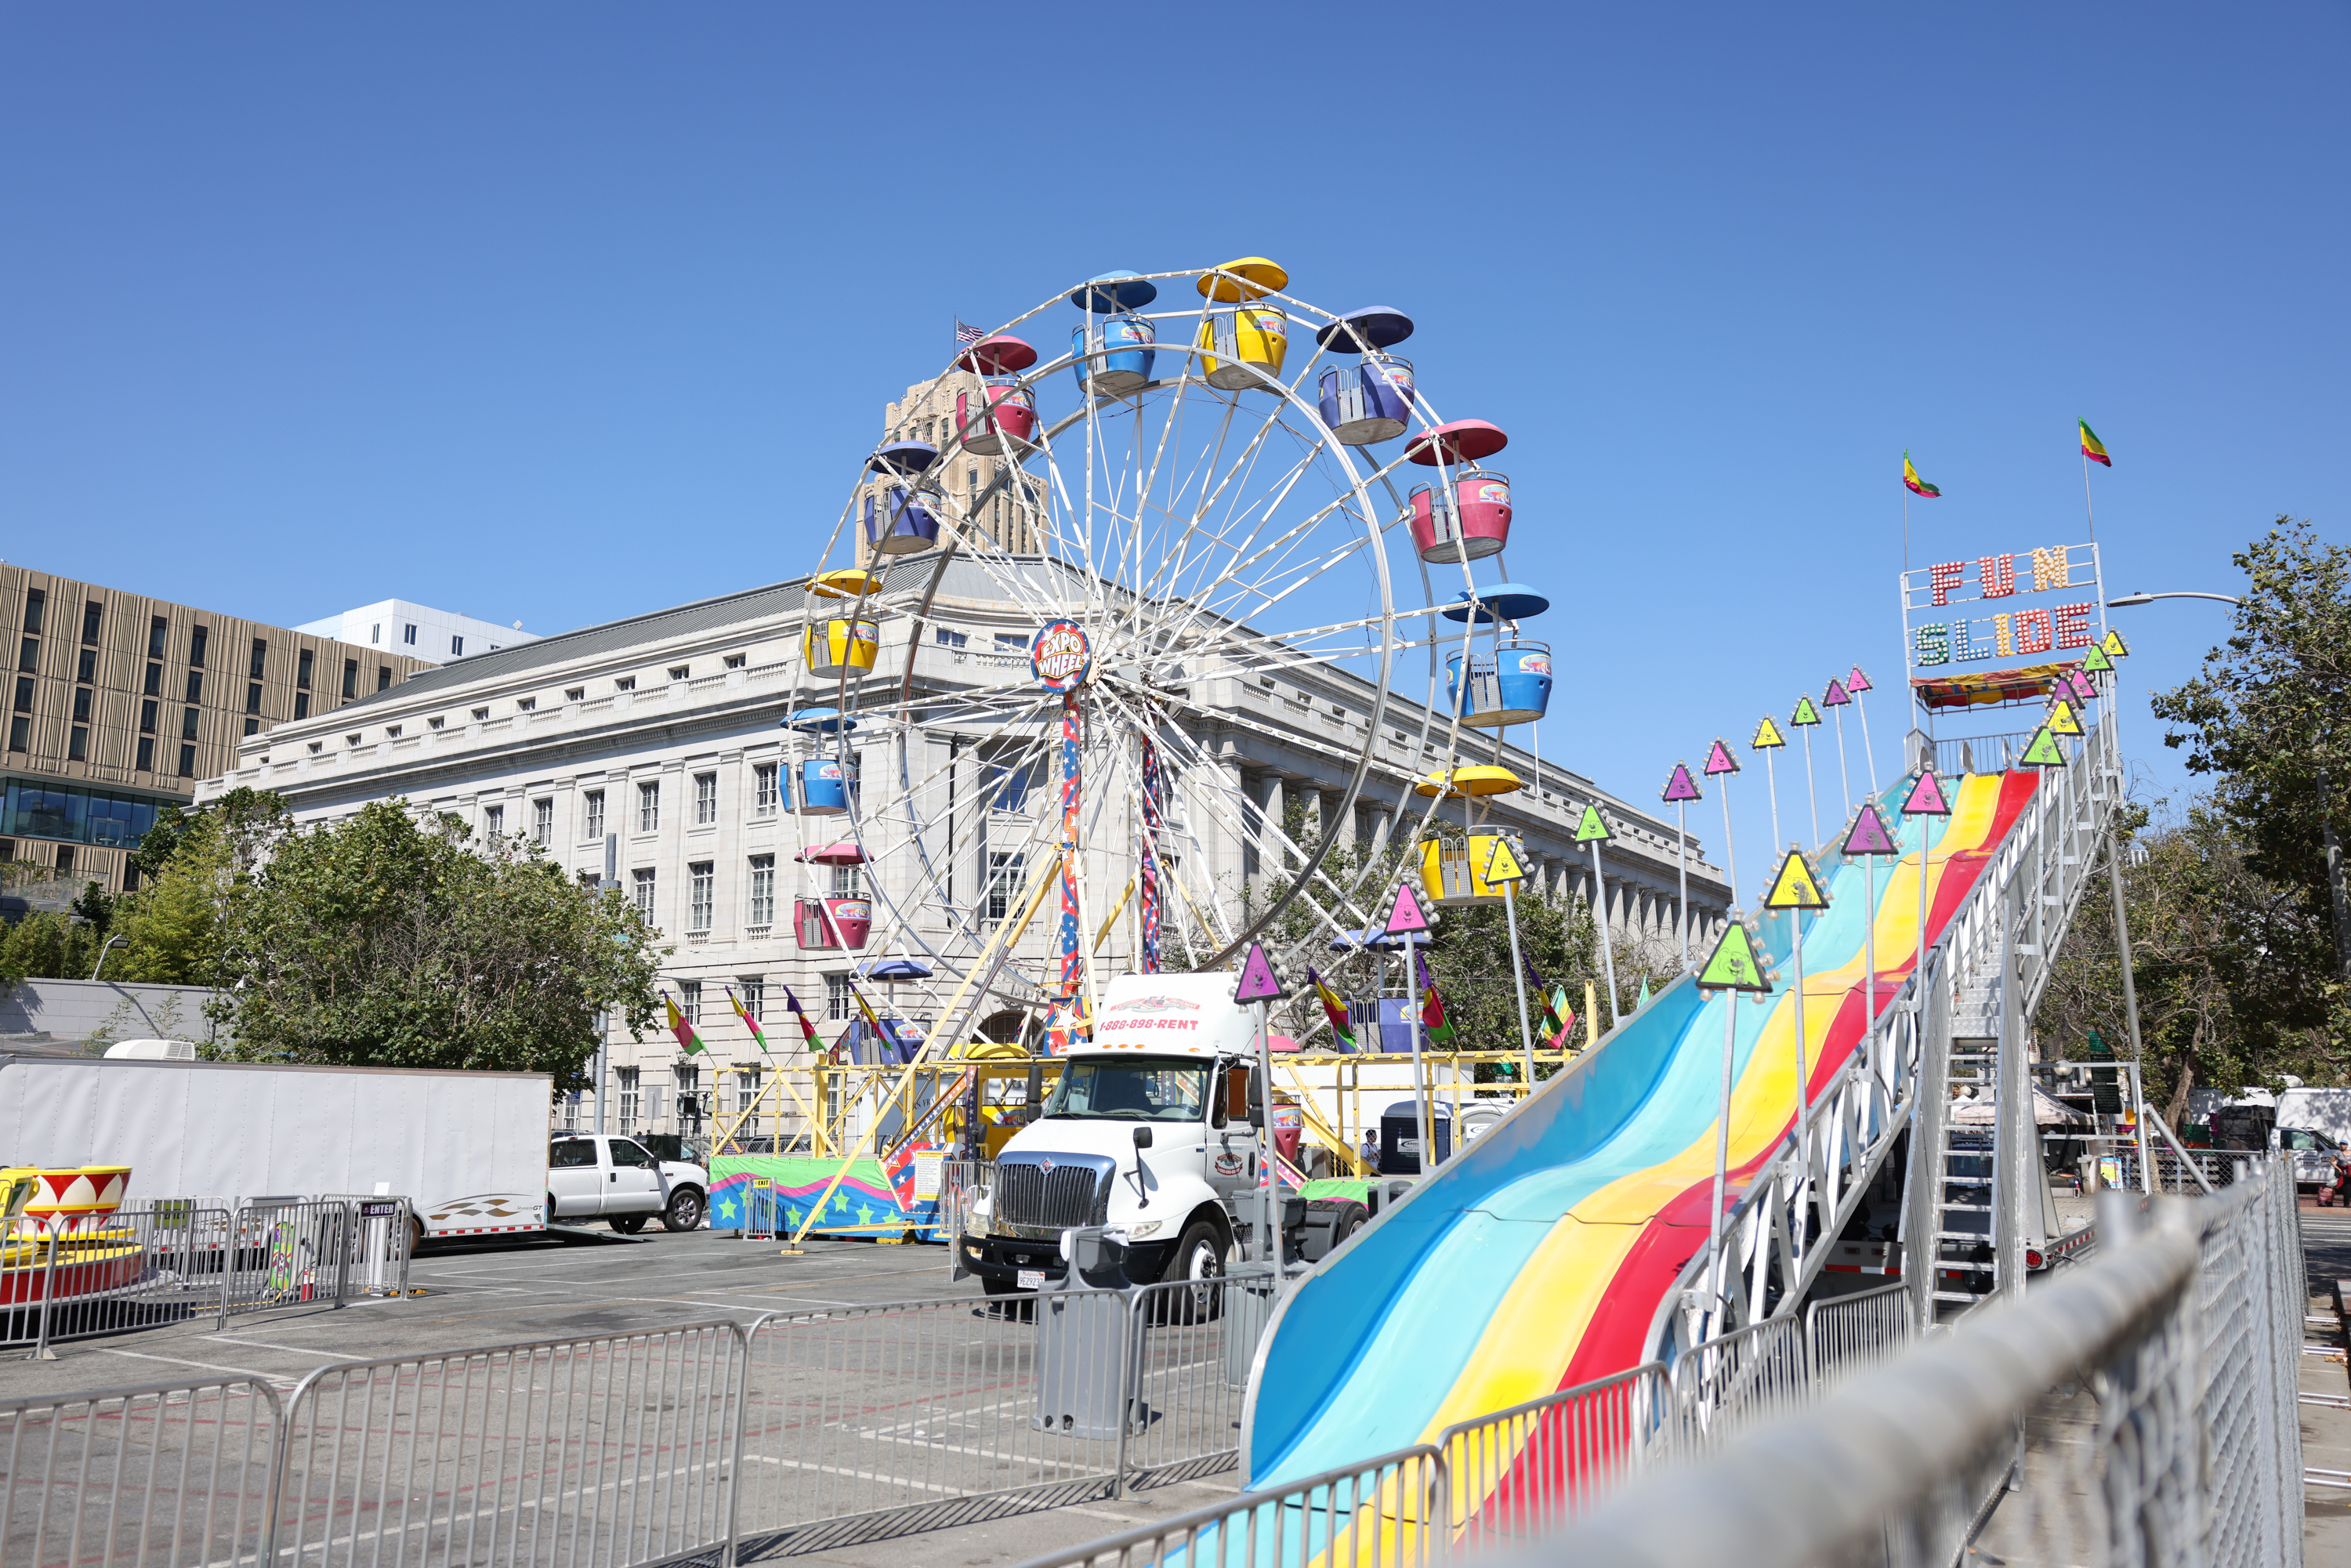 Civic Center carnival, $4 movies: Have fun for $10 or less in San Francisco this weekend